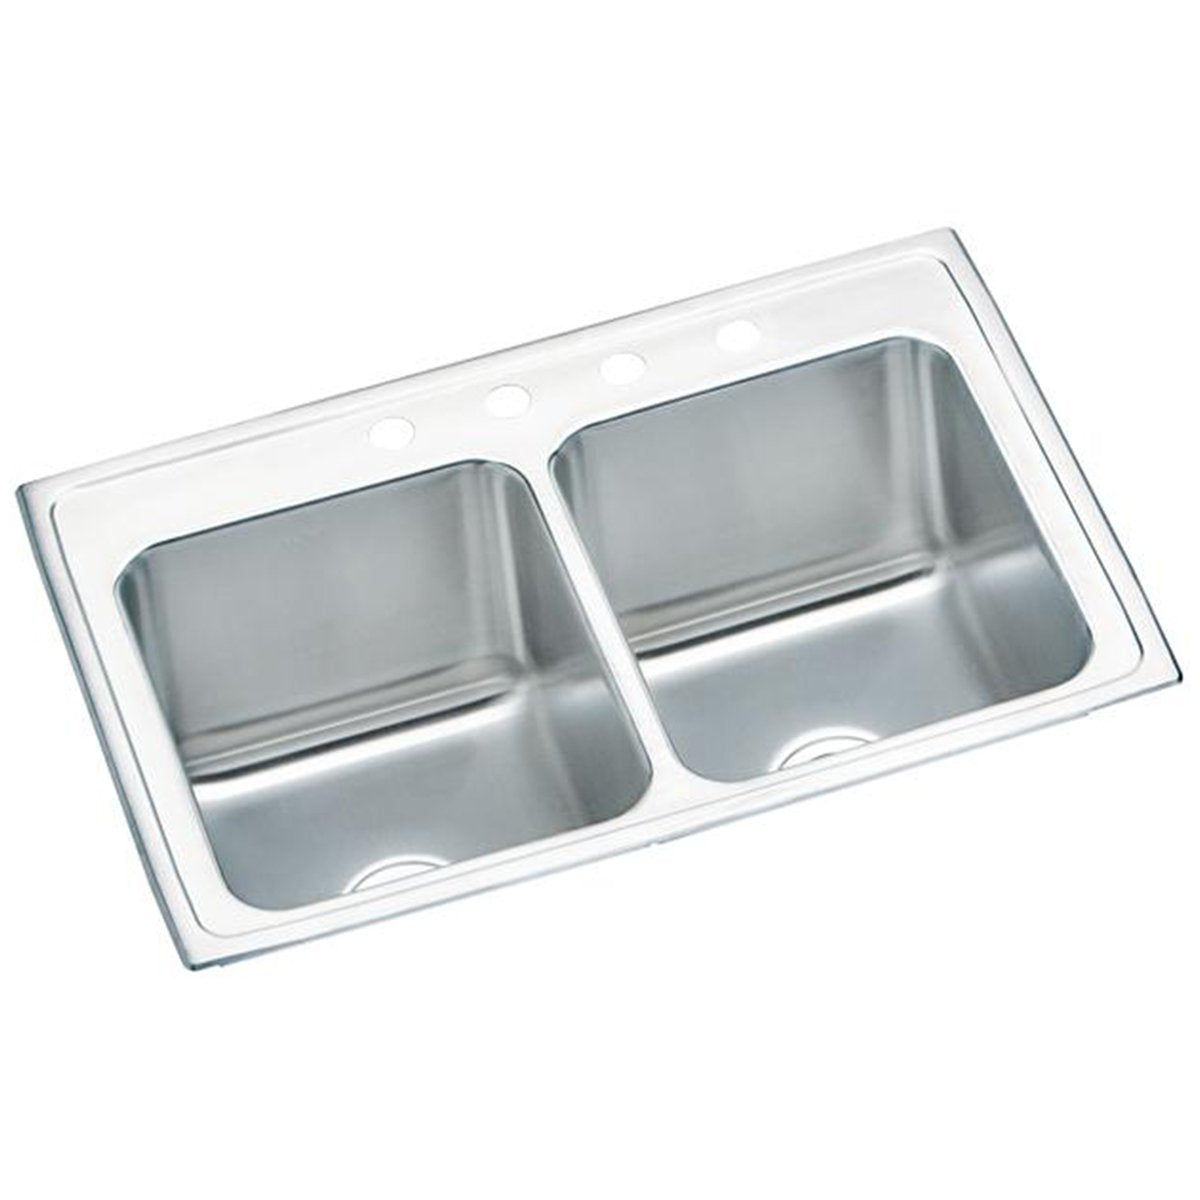 Elkay Lustertone Classic 33" x 22" x 10-1/8" Equal Double Bowl Drop-in Stainless Steel Sink